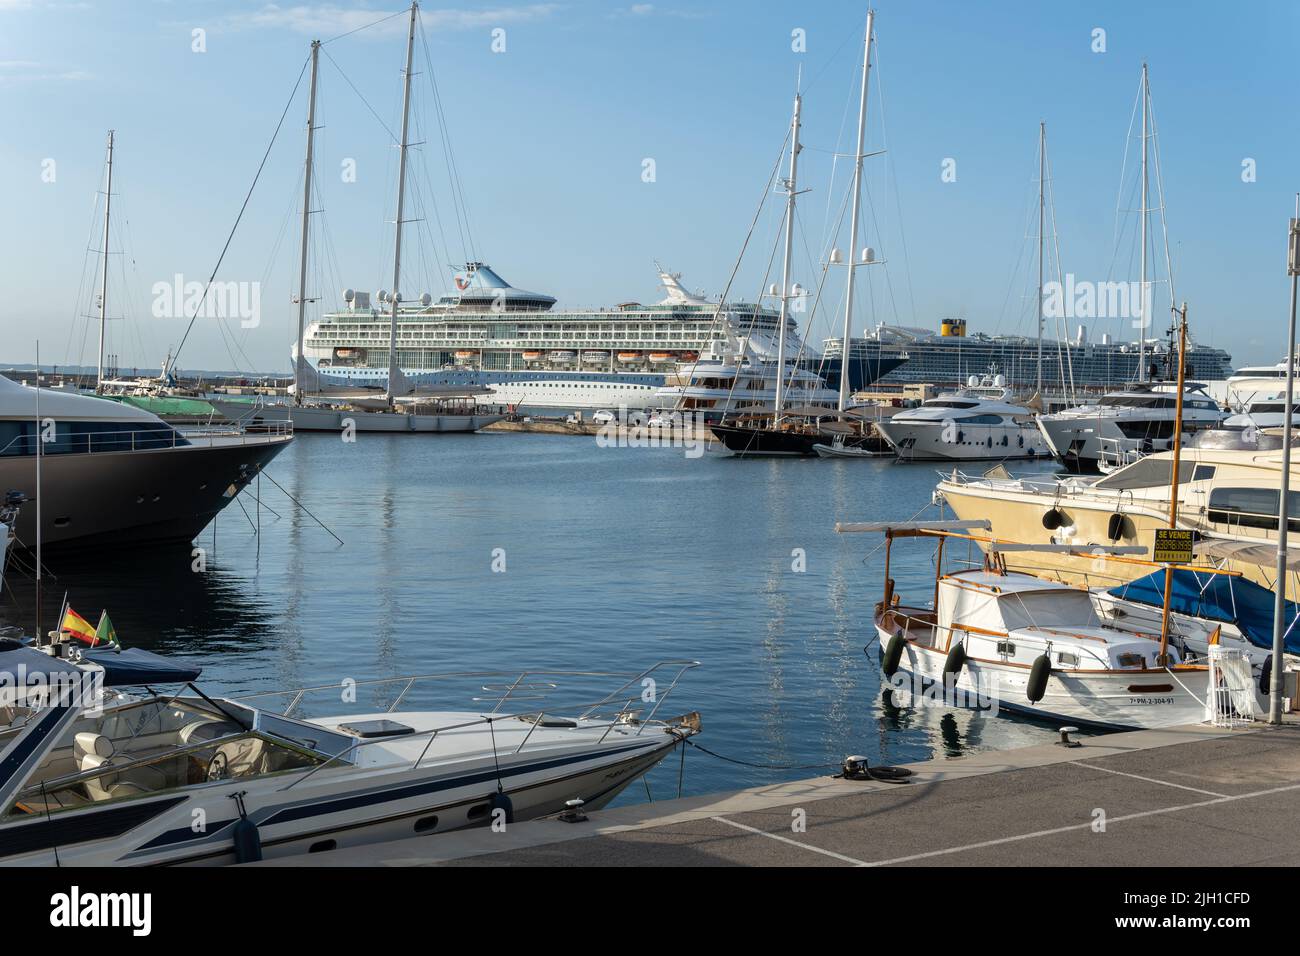 Palma de Mallorca, Spain; june 28 2022: General view of Palma de Mallorca's maritime station at dawn, with cruisers moored in the background Stock Photo